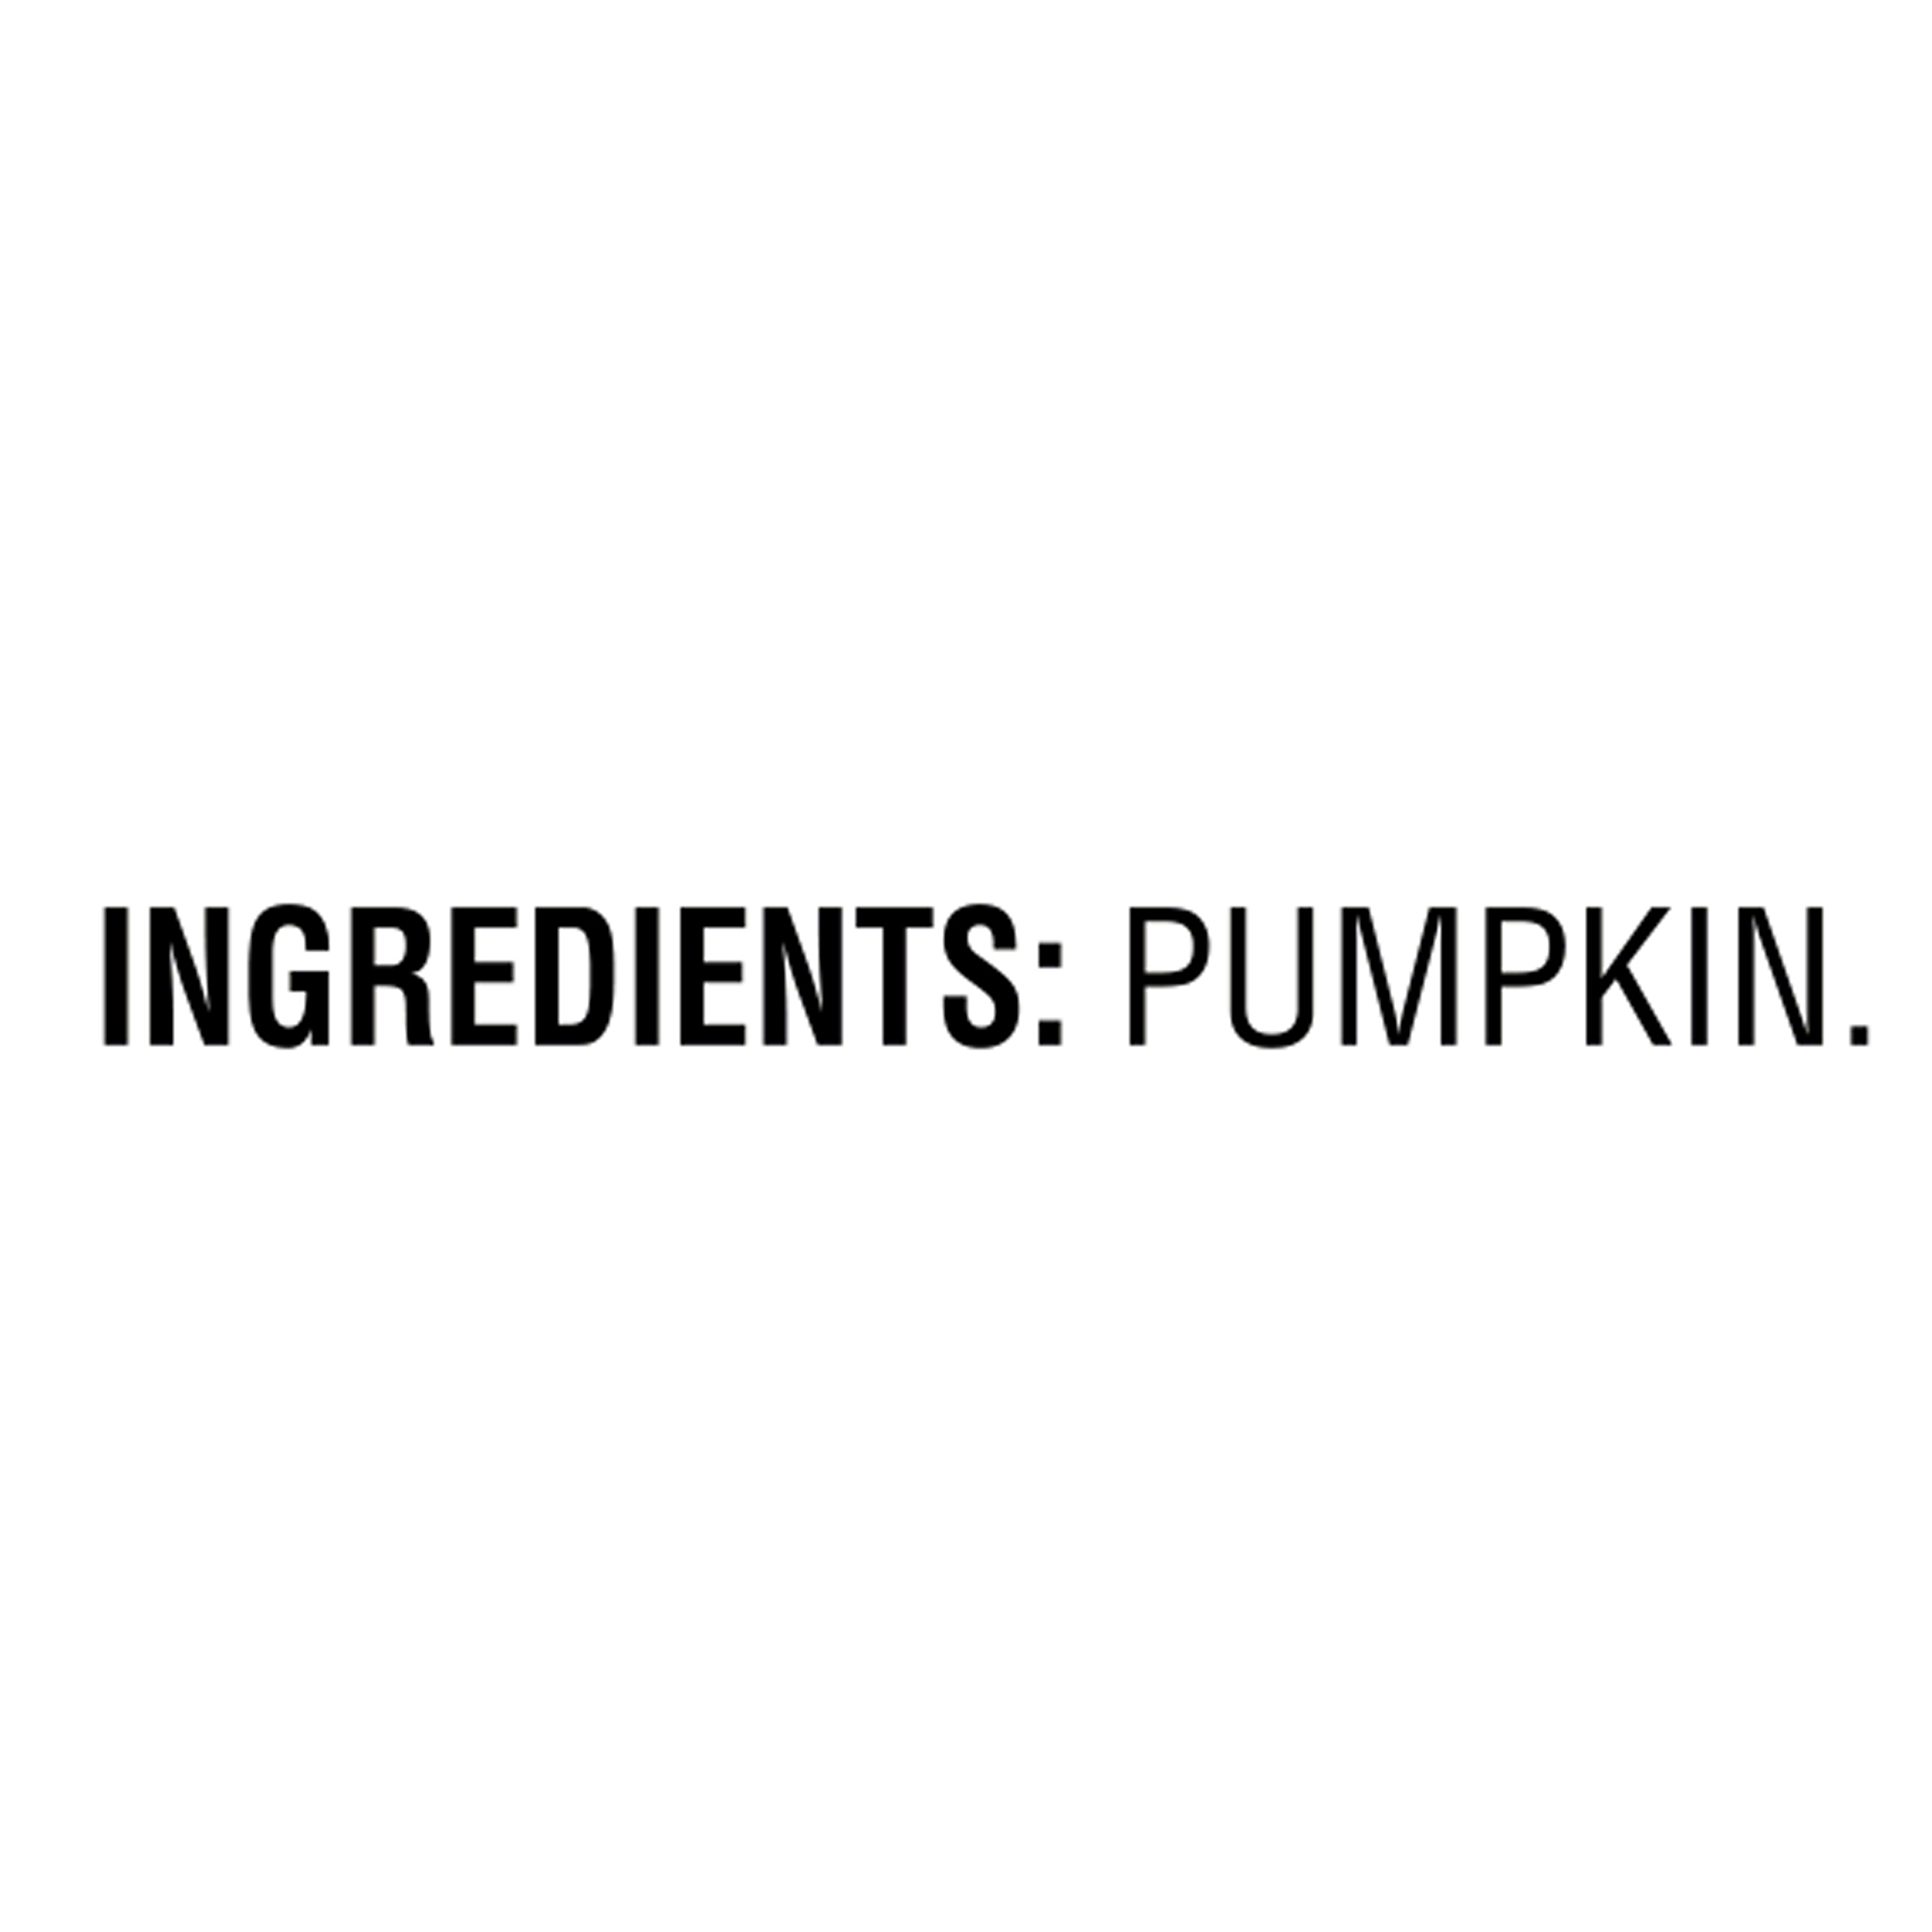 Great Value 100% Pure Pumpkin, 15 oz - image 3 of 9